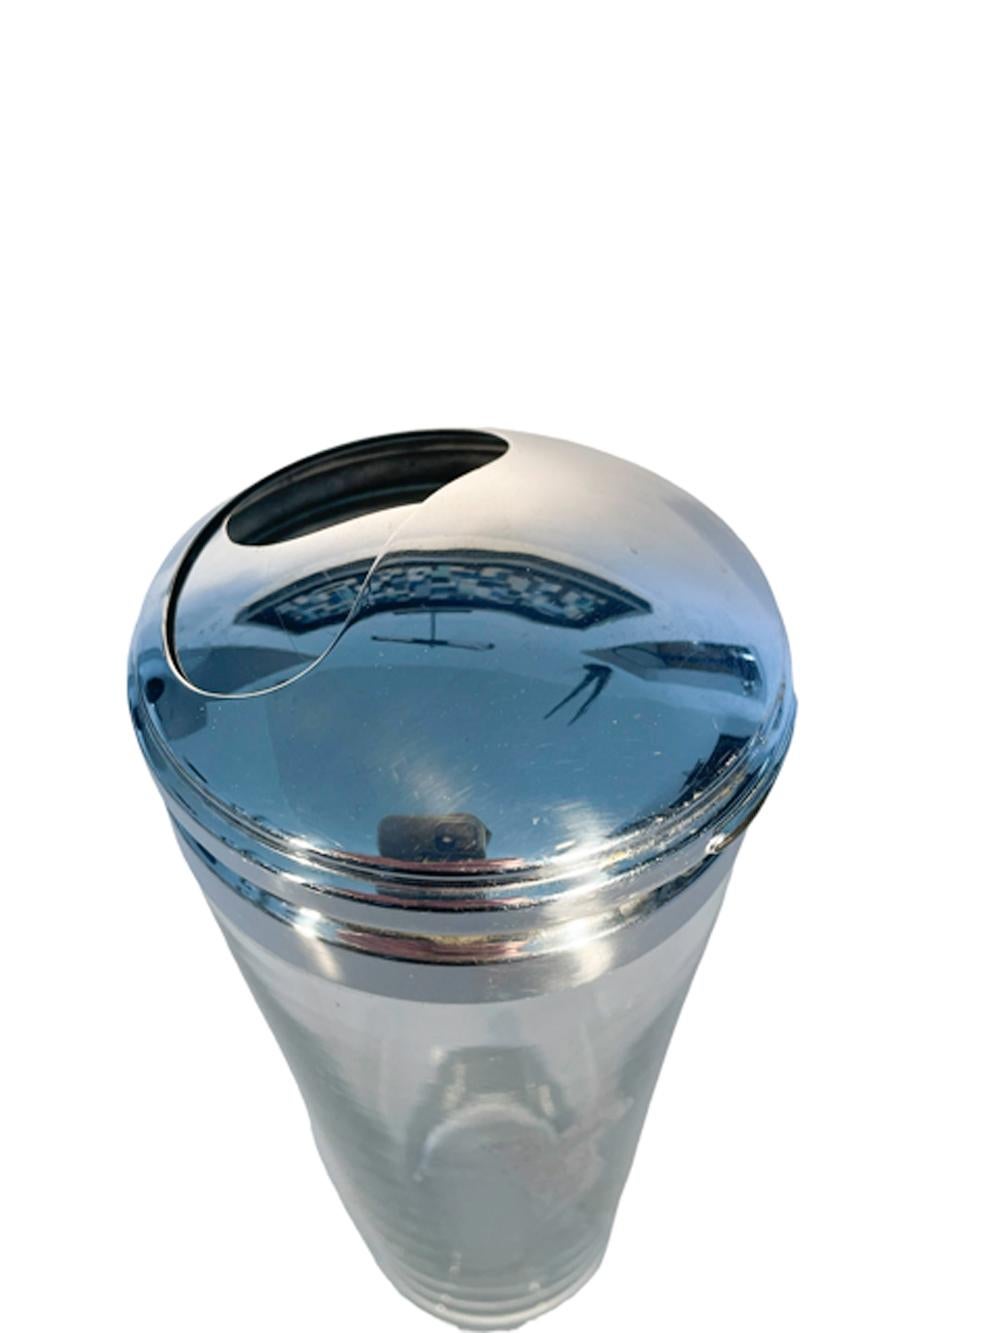 Clear glass cocktail shaker with a silver overlay golfer, set on a polished foot and capped with a two-part 'turn to open' lid, patented in 1932. The outer lid turns over the inner lid, when open cocktail ingredients can be placed directly through